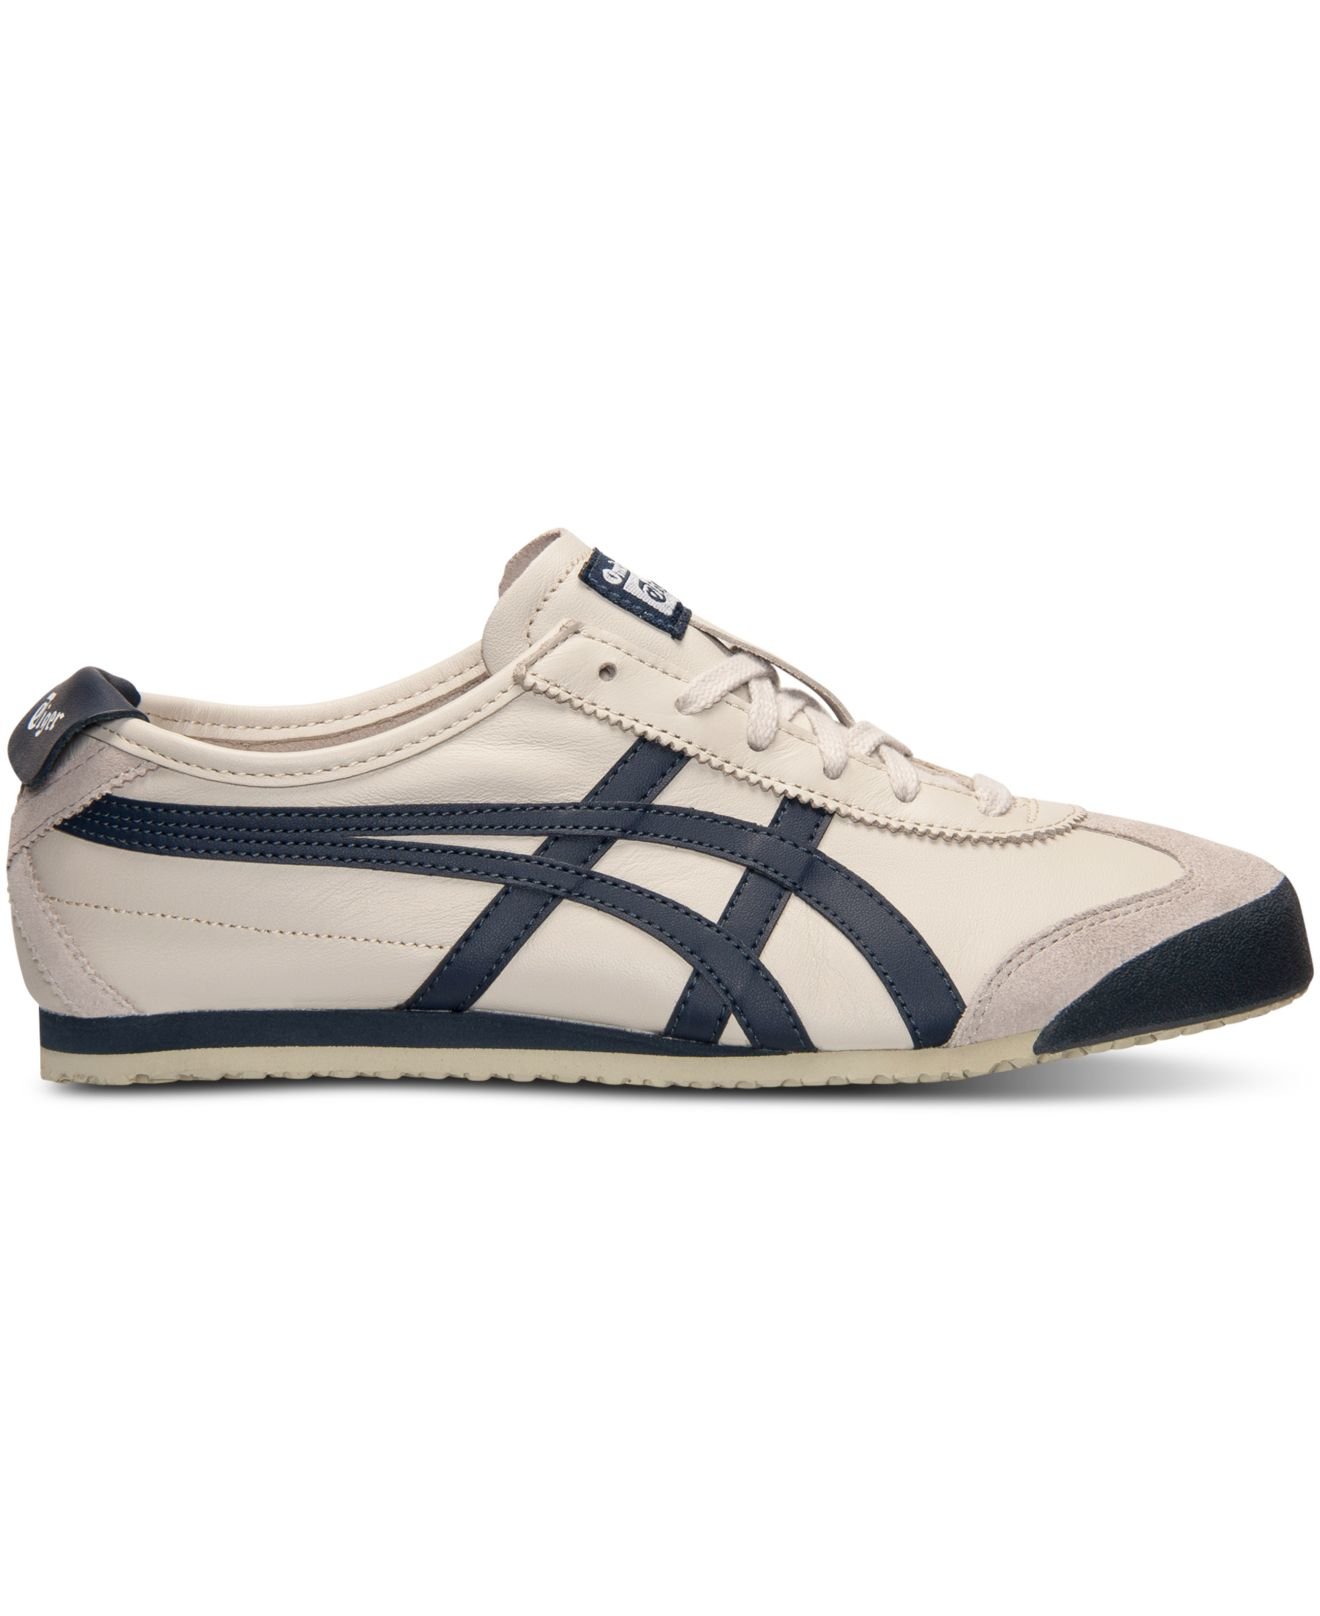 Lyst - Asics Men's Onitsuka Tiger Mexico 66 Casual Sneakers From Finish ...